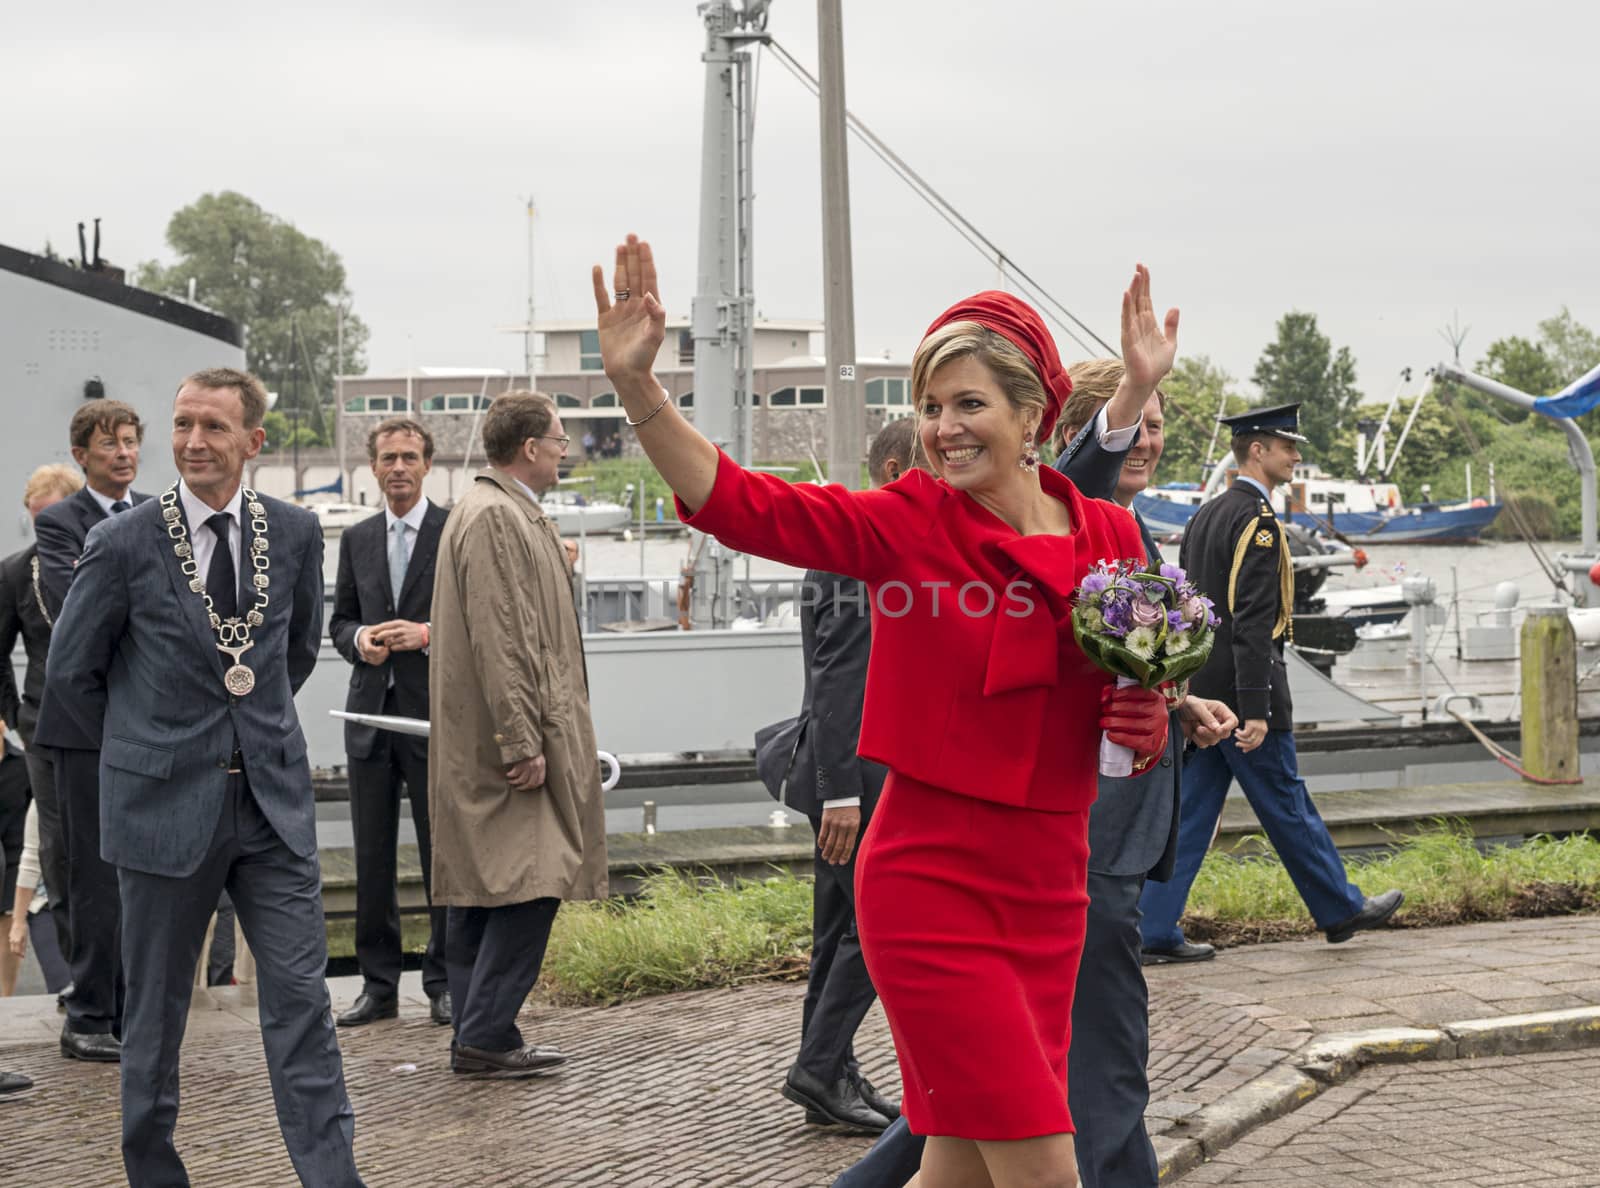 Hellevoetsluis,HOLLAND - JUNE 21:King Willem Alexander and Queen maxima showing to the dutch citizens,on June 21,2013 in Hellevoetsluis,Holland.They visit the citizins because of his coronation